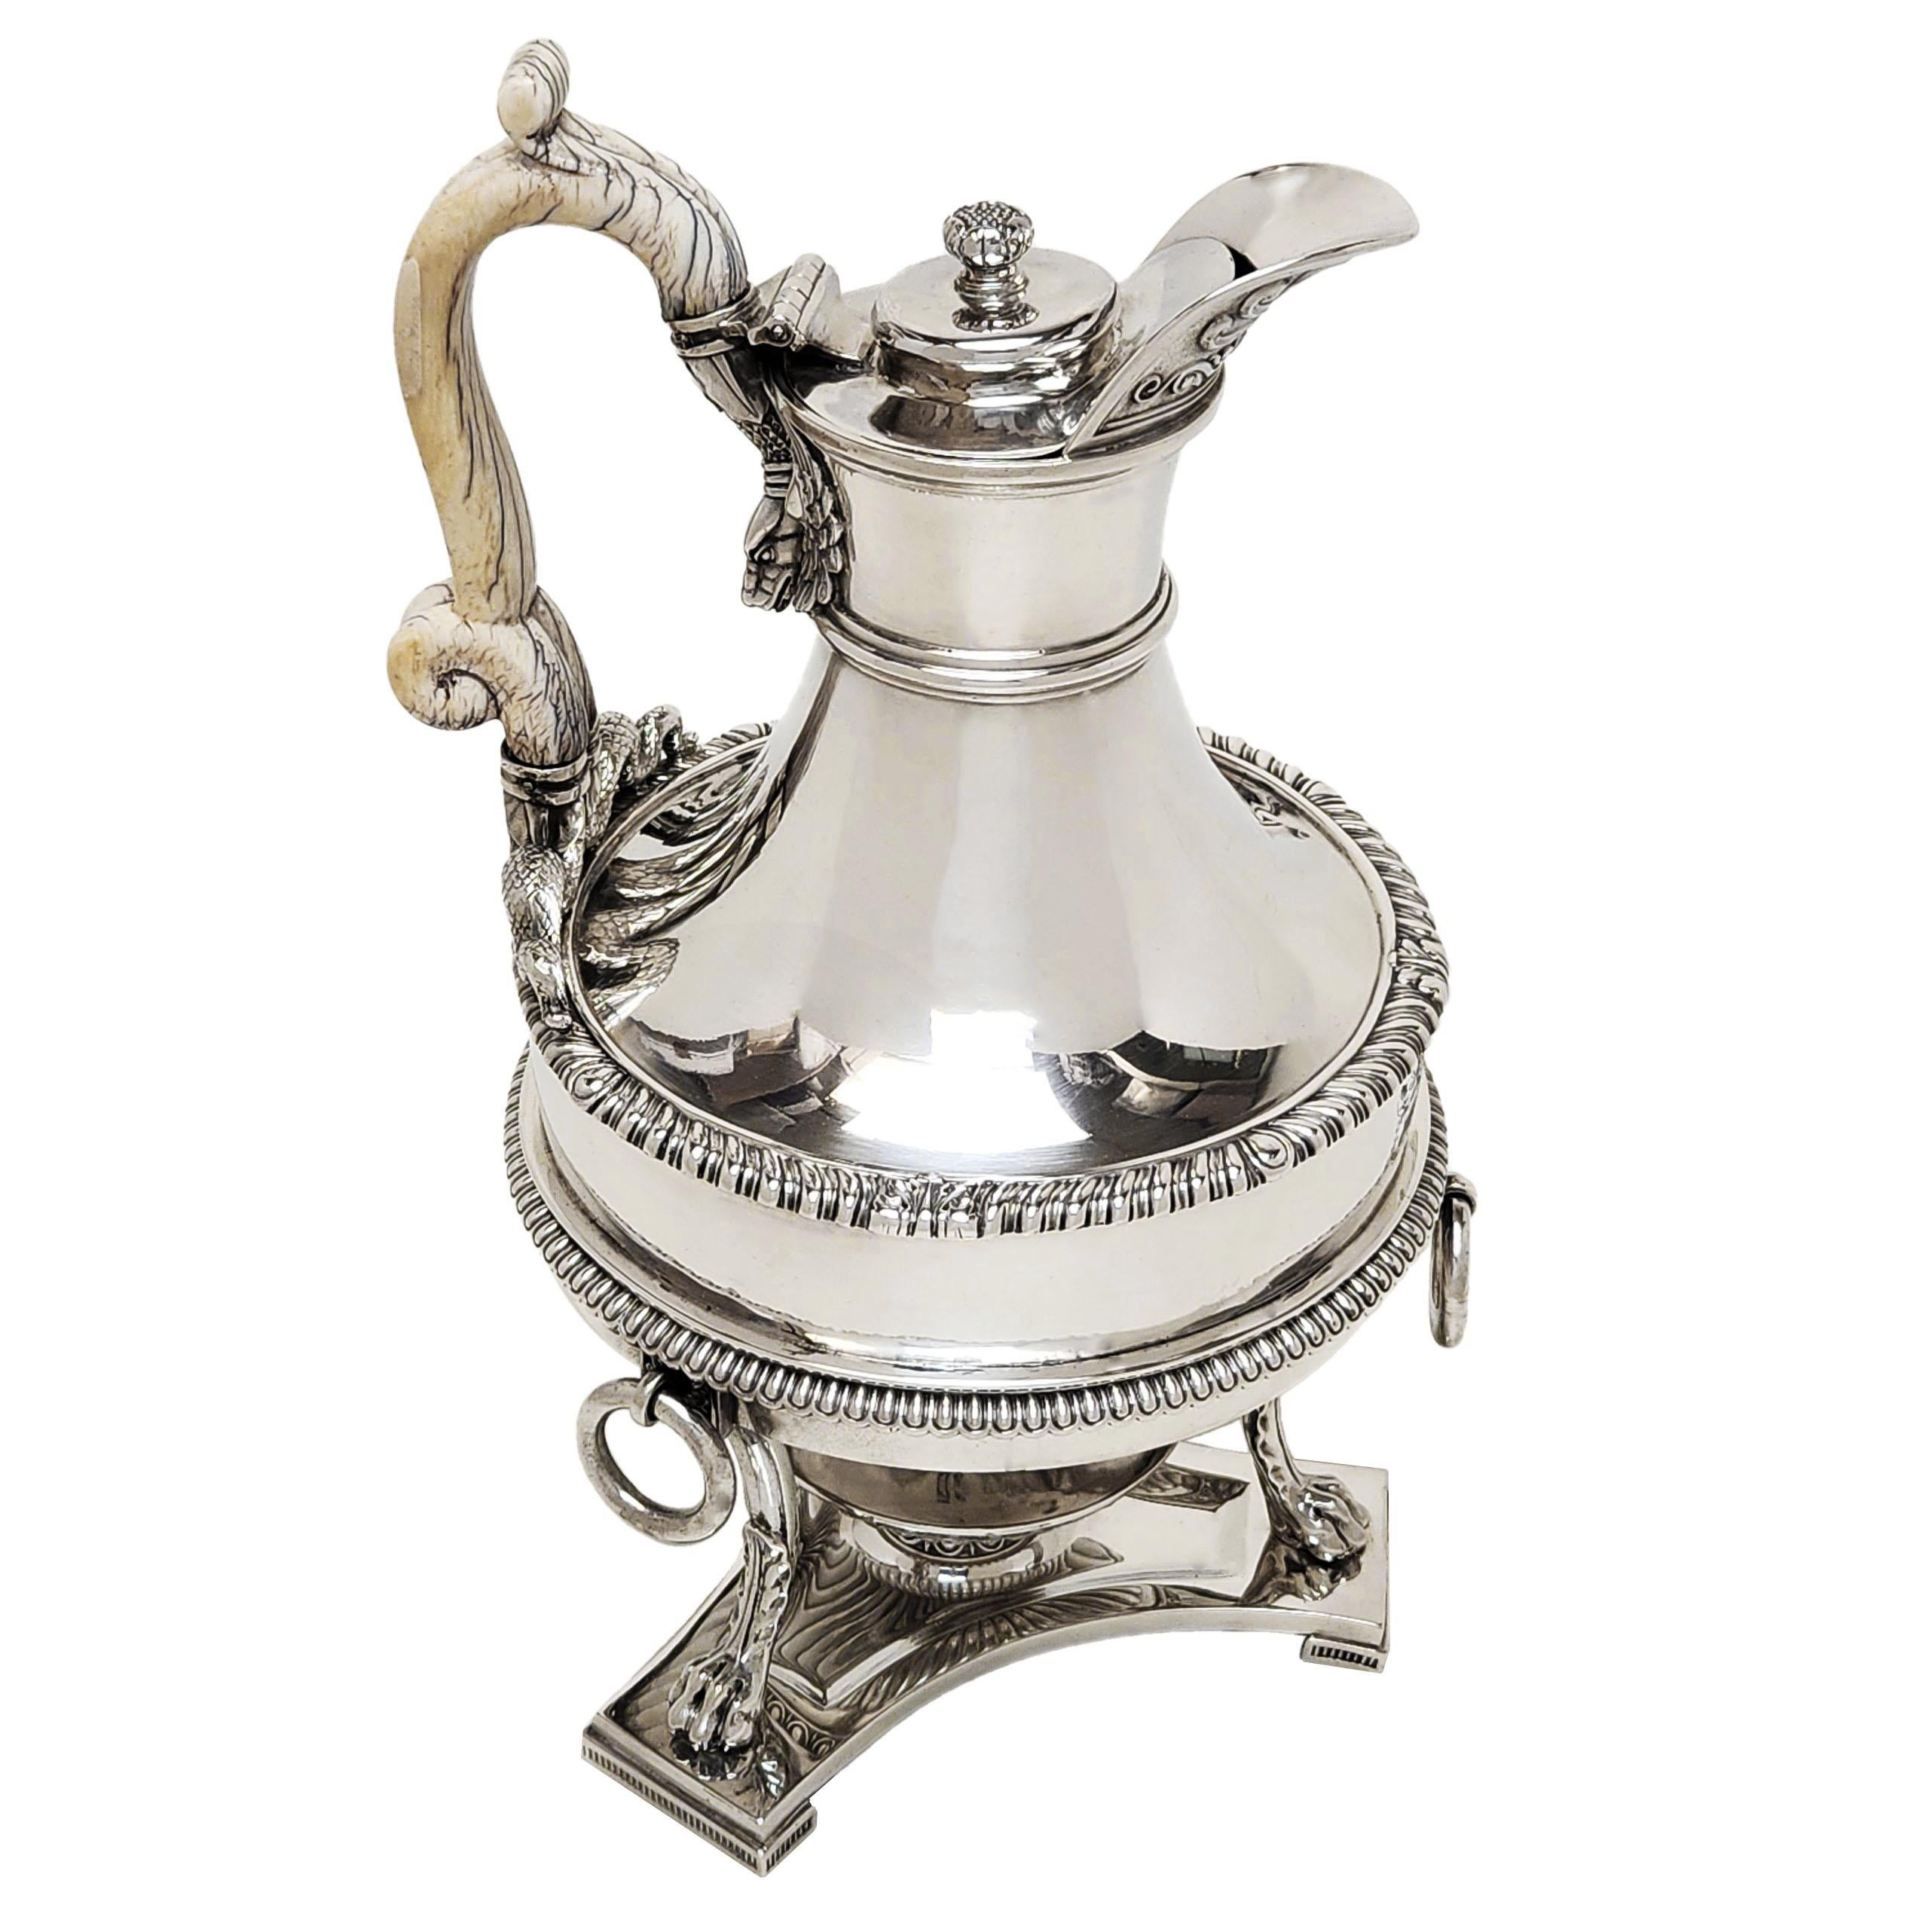 An impressive Antique Solid Silver Coffee Biggin on stand with a burner featuring design elements so iconic in the work of Paul Storr. The Silver Biggin has a magnificent bone handle in the style of a serpent with a snakes head and tails on either